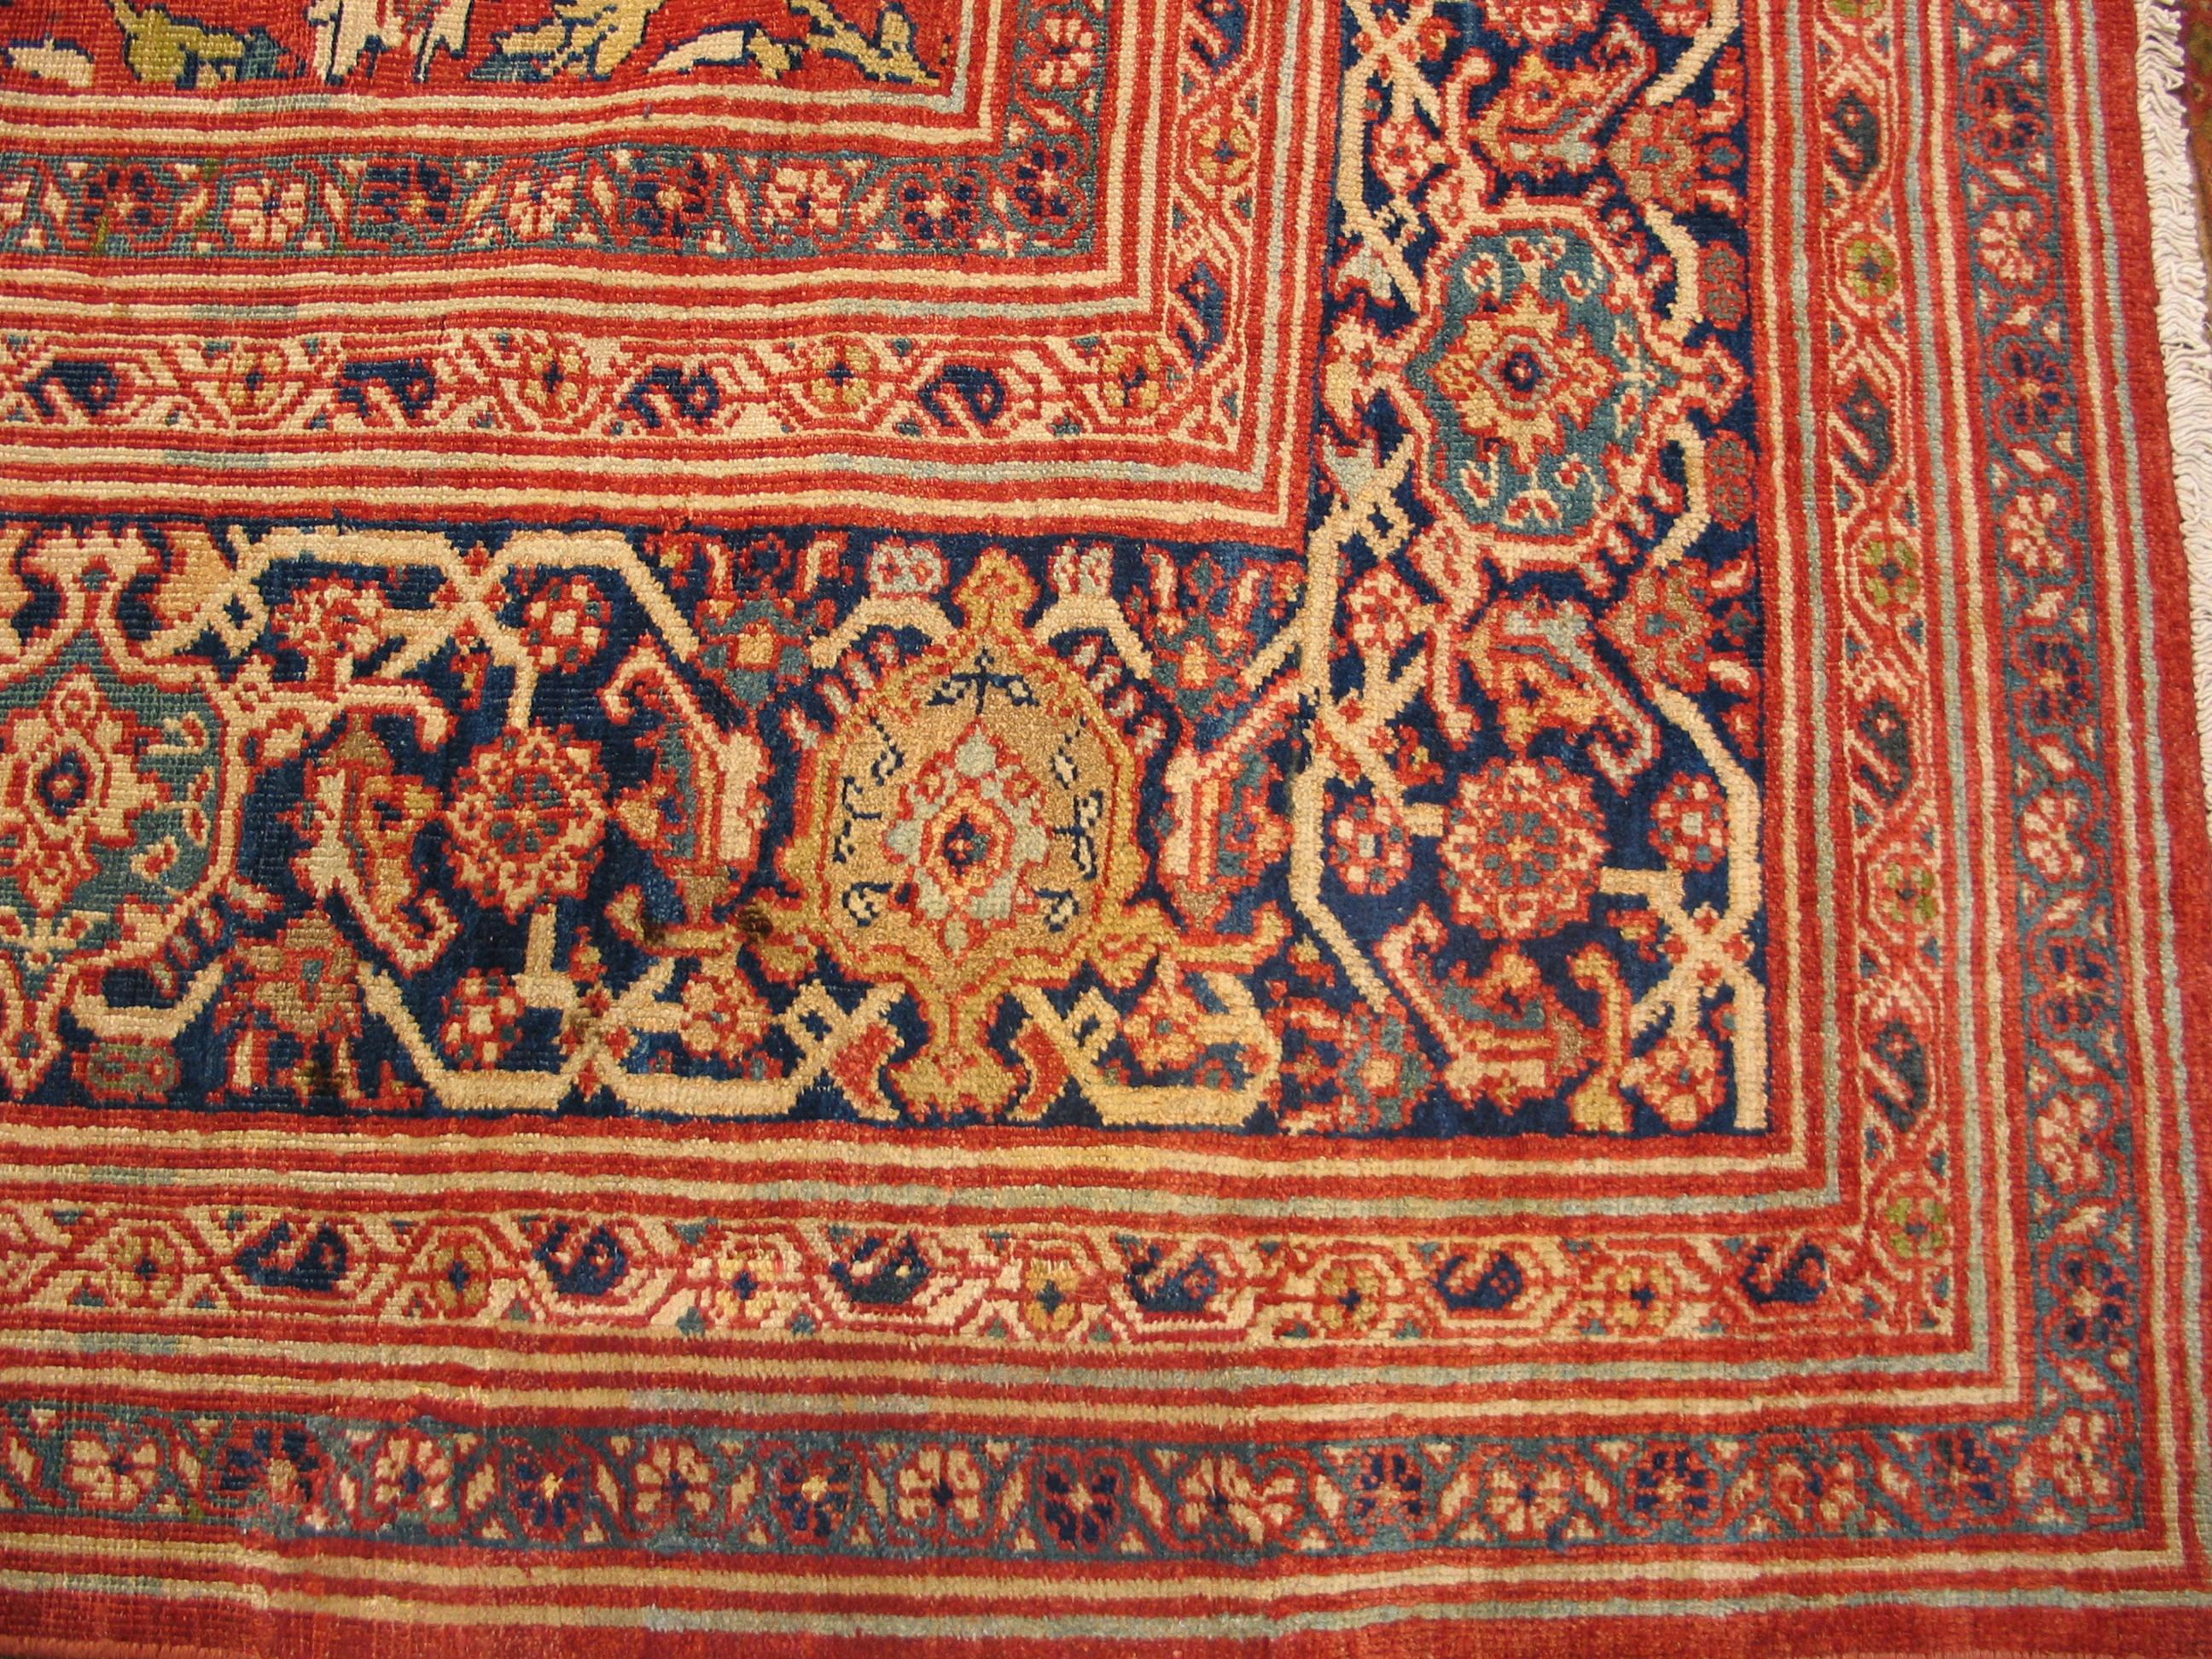 Antique Sultanabad rug, size: 12' 9'' x 22' 2''.